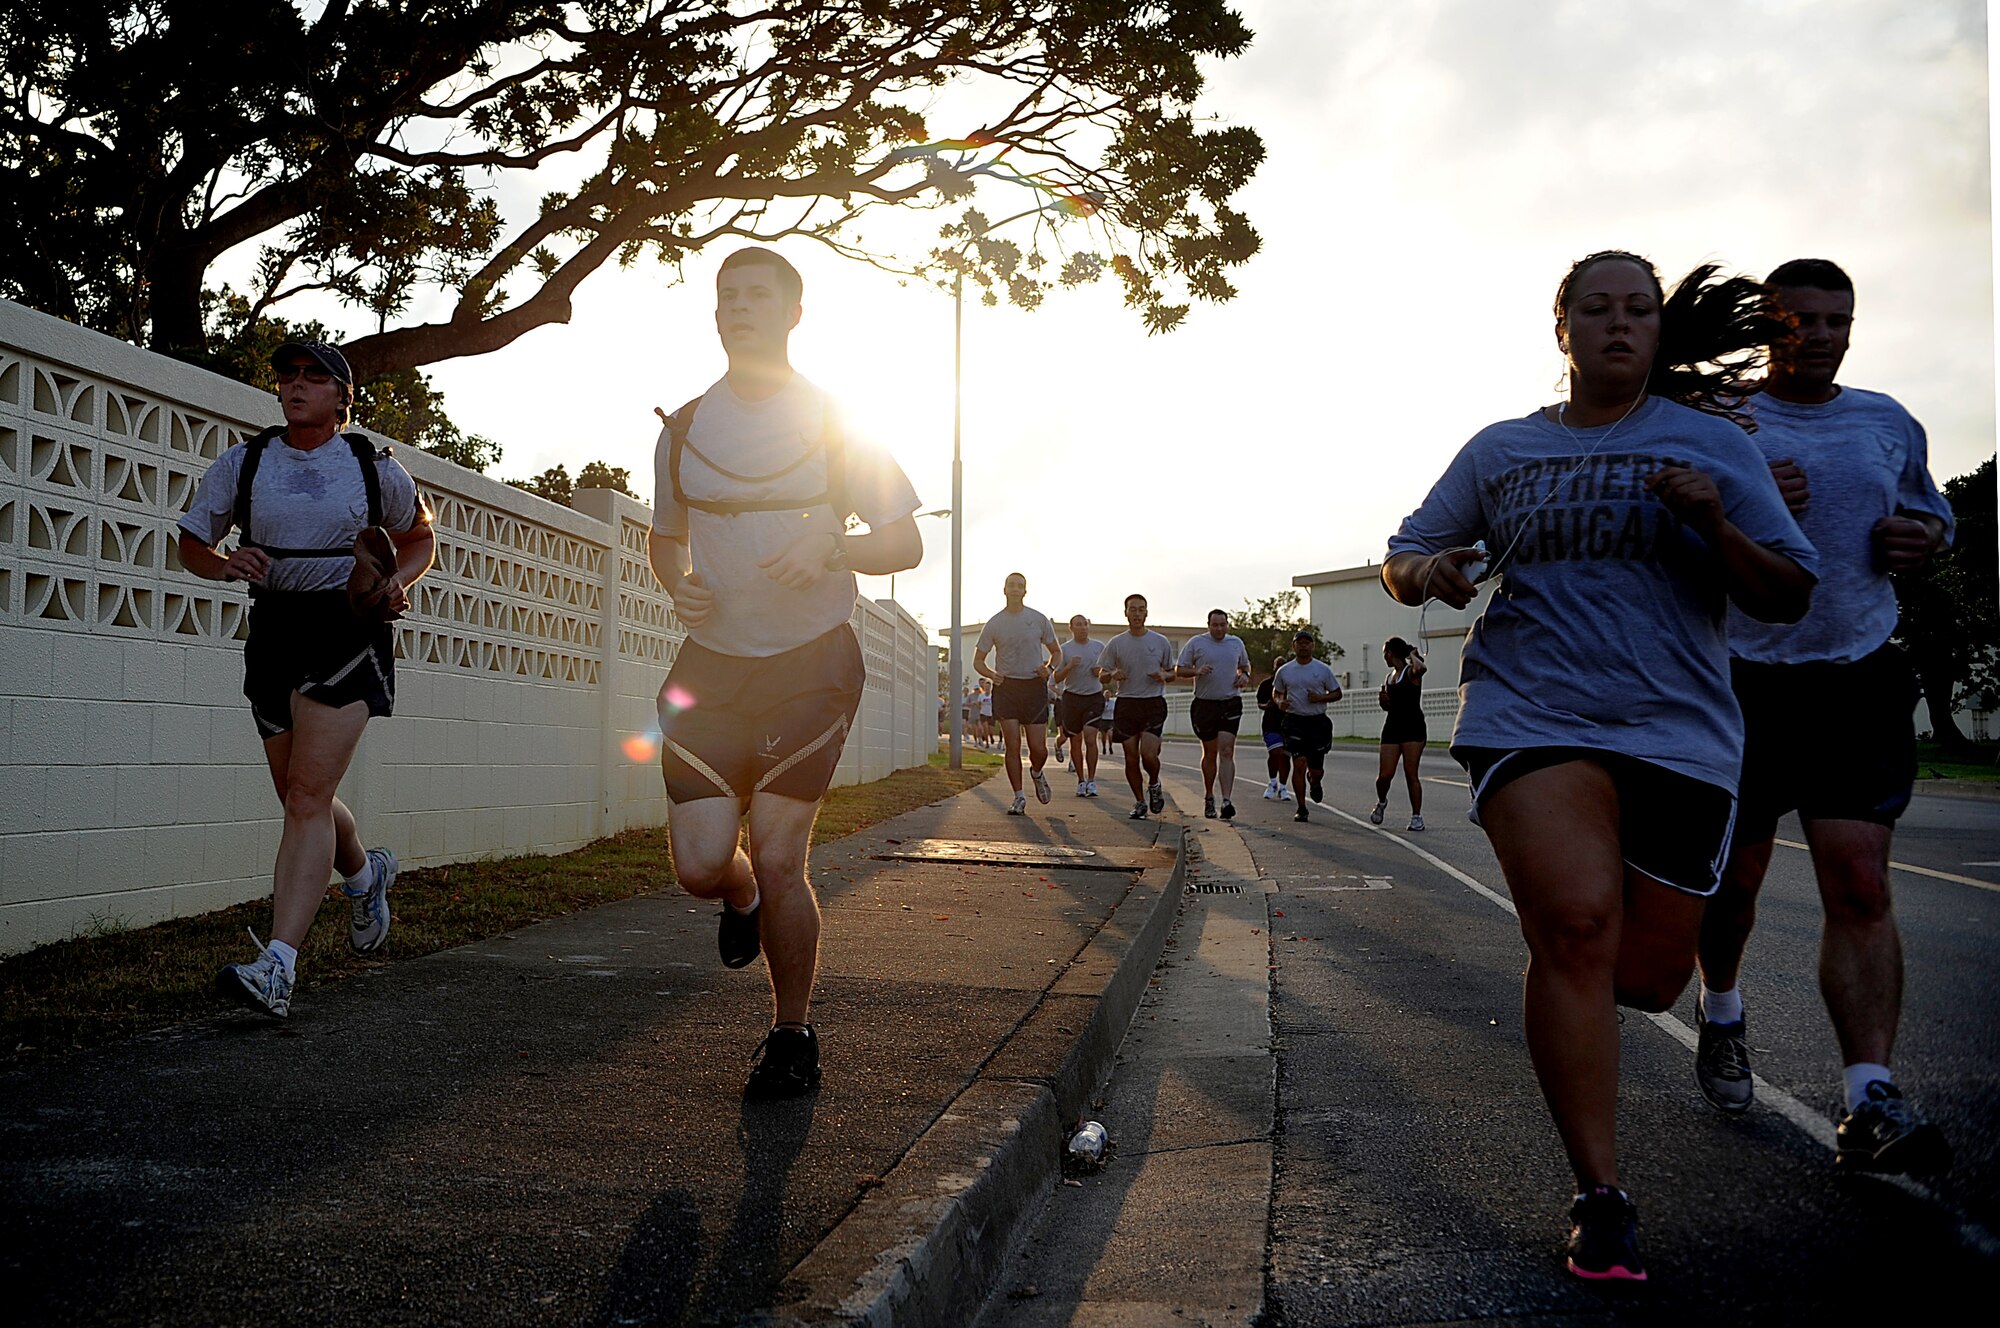 Members of Team Kadena participate in a 5k fun run fundraiser designed to aid flood victims from Minot Air Force Base, N.D. More than 130 Shogun Warriors raised $2,000 during the event. (U.S. Air Force photo/Staff Sgt. Christopher Hummel)